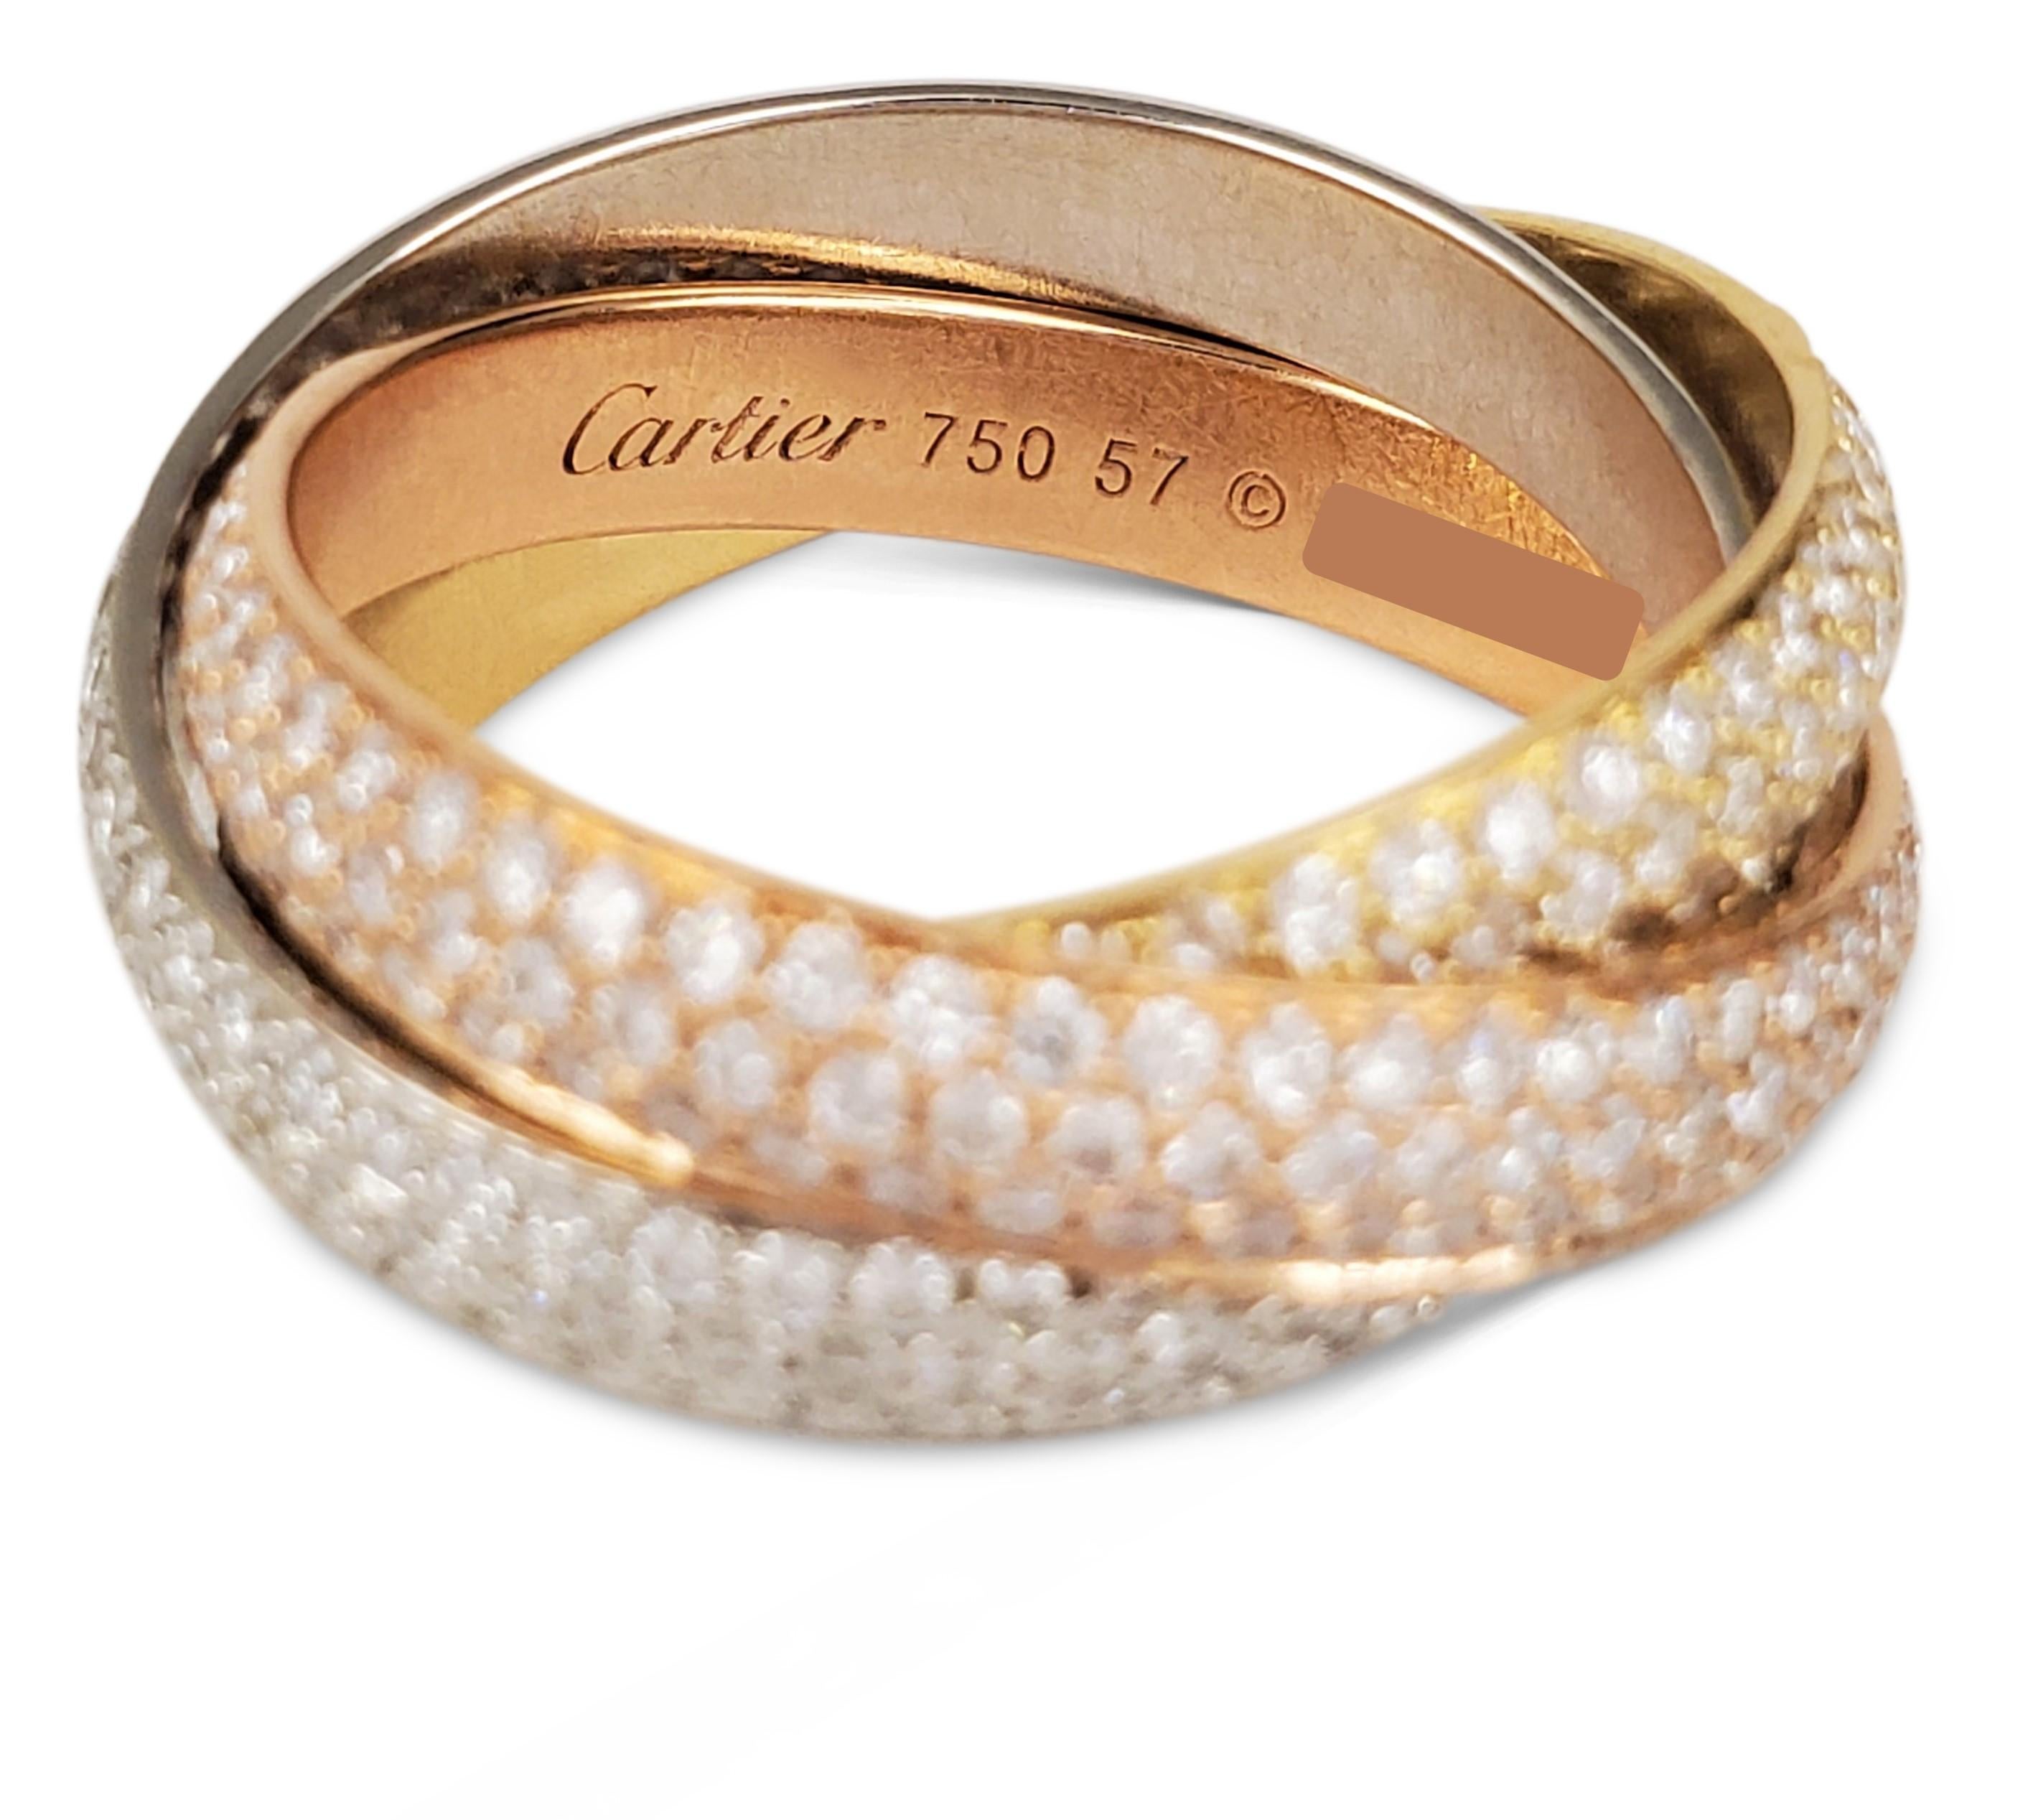 Authentic Cartier 'Trinity' ring comprised of three interlocking mobile bands of 18 karat yellow, rose, and white gold. Each ring is encrusted with pave set high quality round brilliant cut diamonds of an estimated 2.98 carats. Signed Cartier, 750,